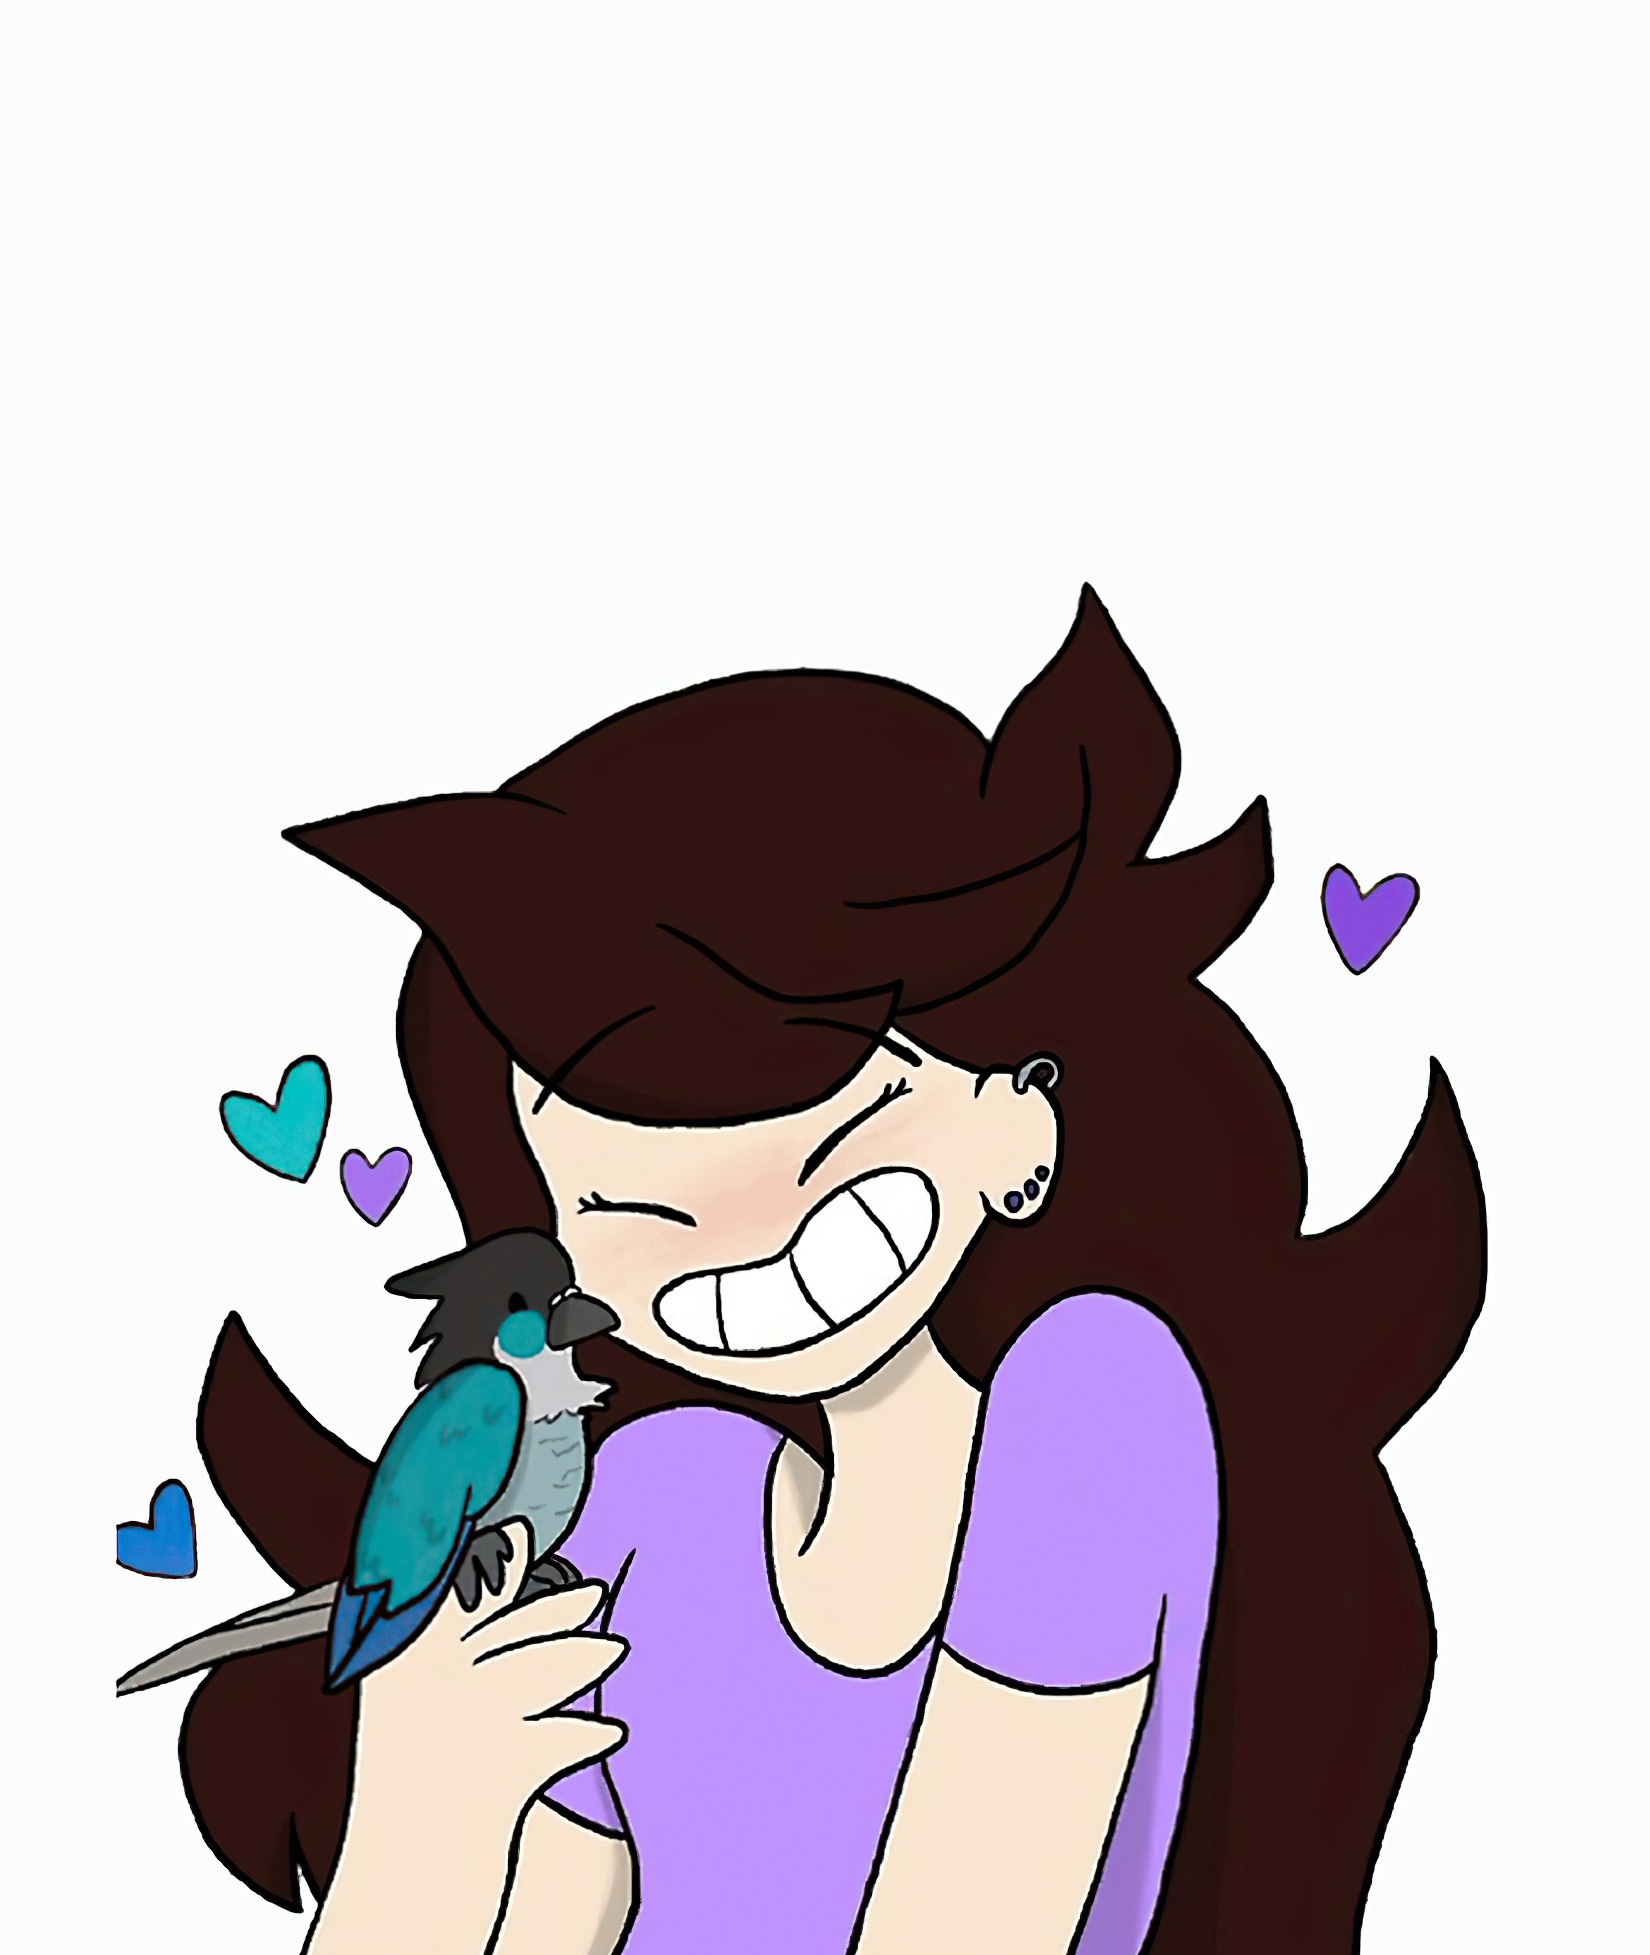 Jaiden Animations Merch Poster Art Wall Poster Sticky Poster Gift For Fan